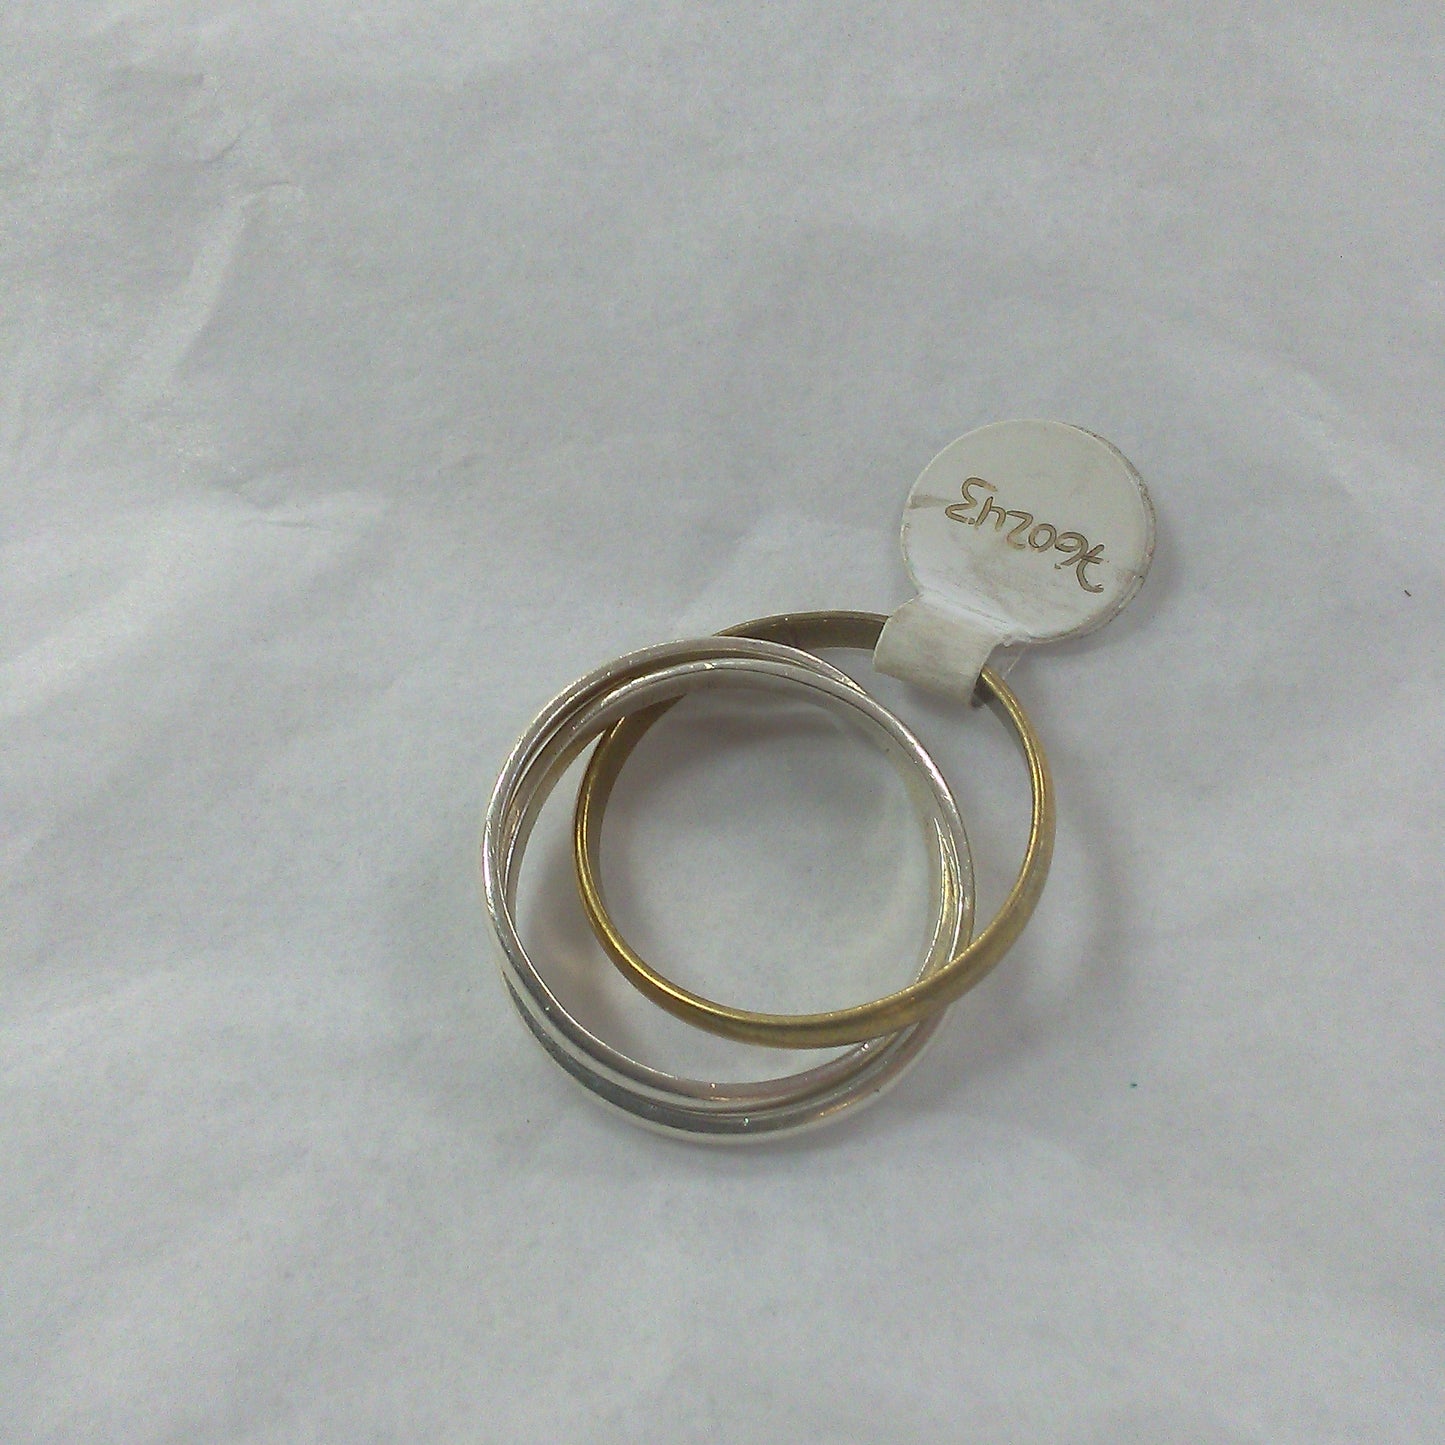 Three-Banded Ring, size 7